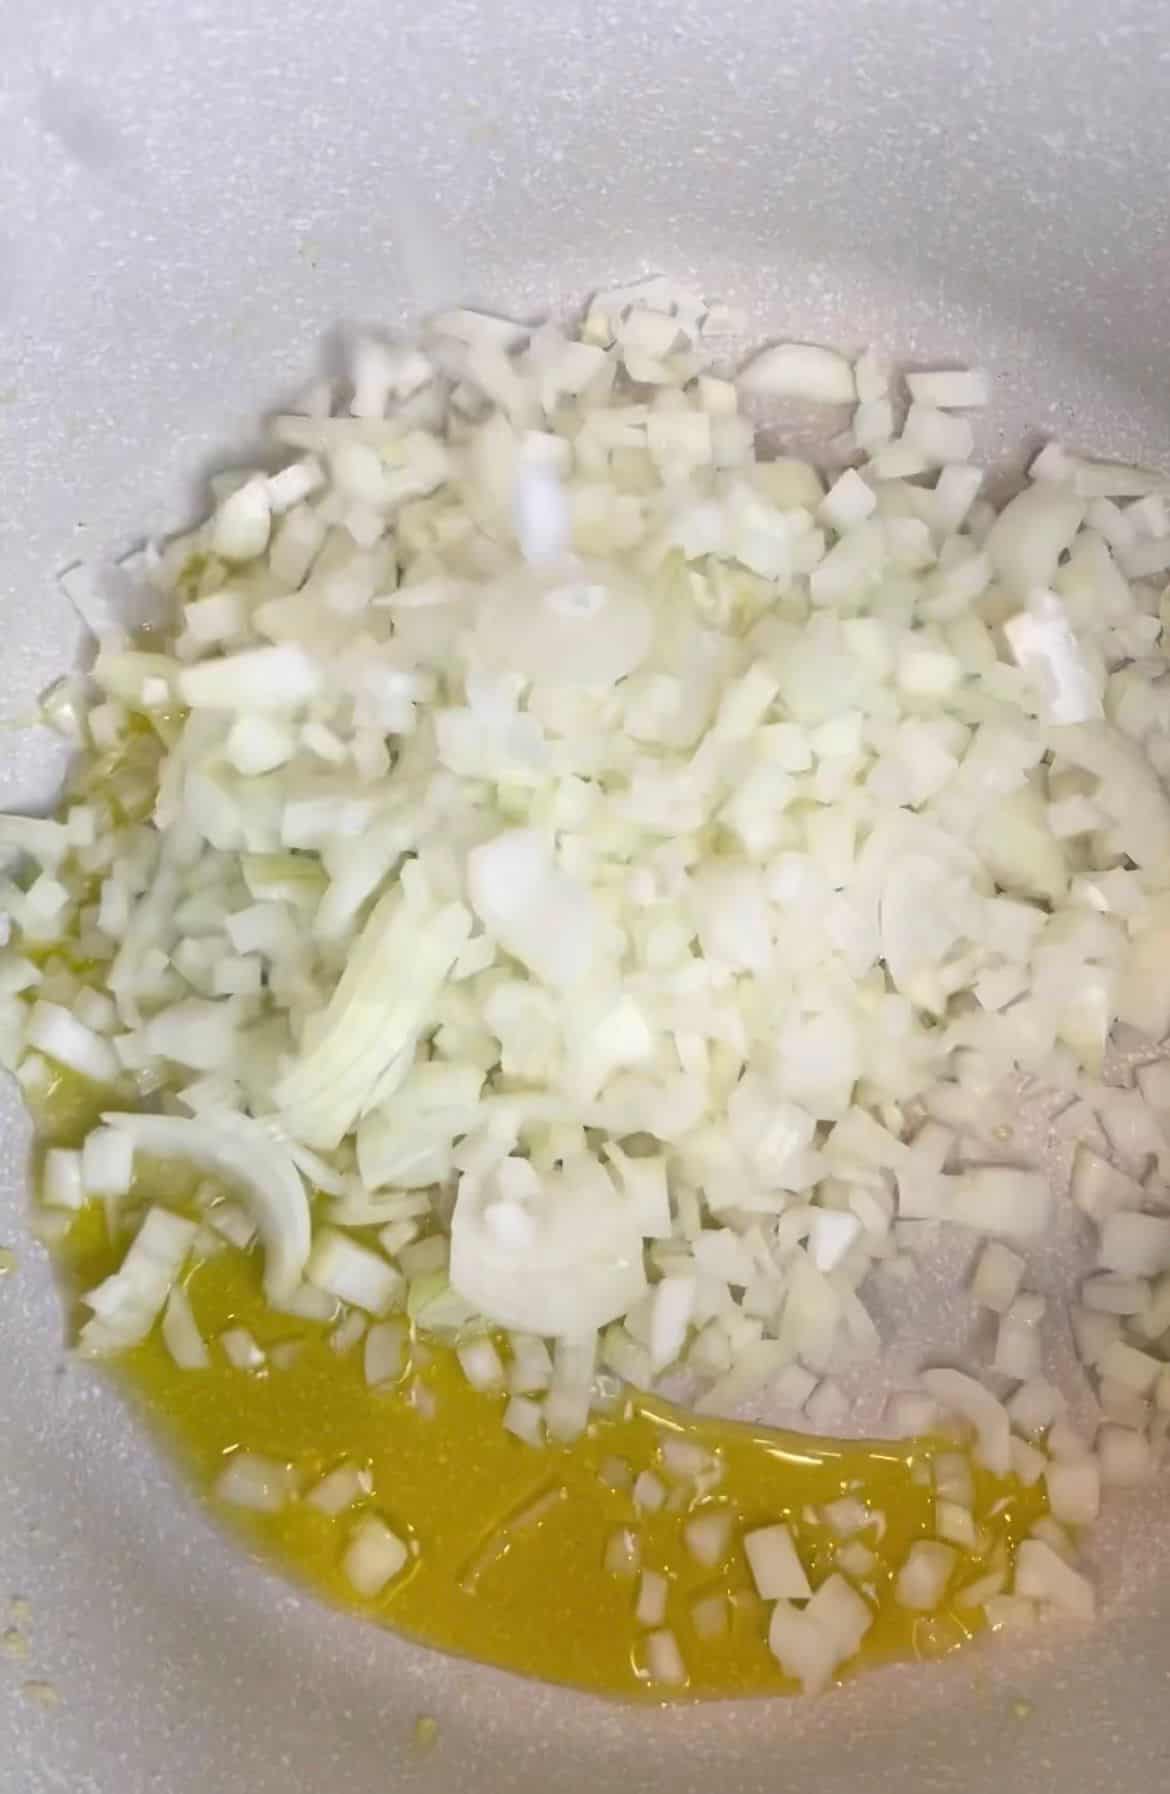 Some oil and cubed onions in a skillet.